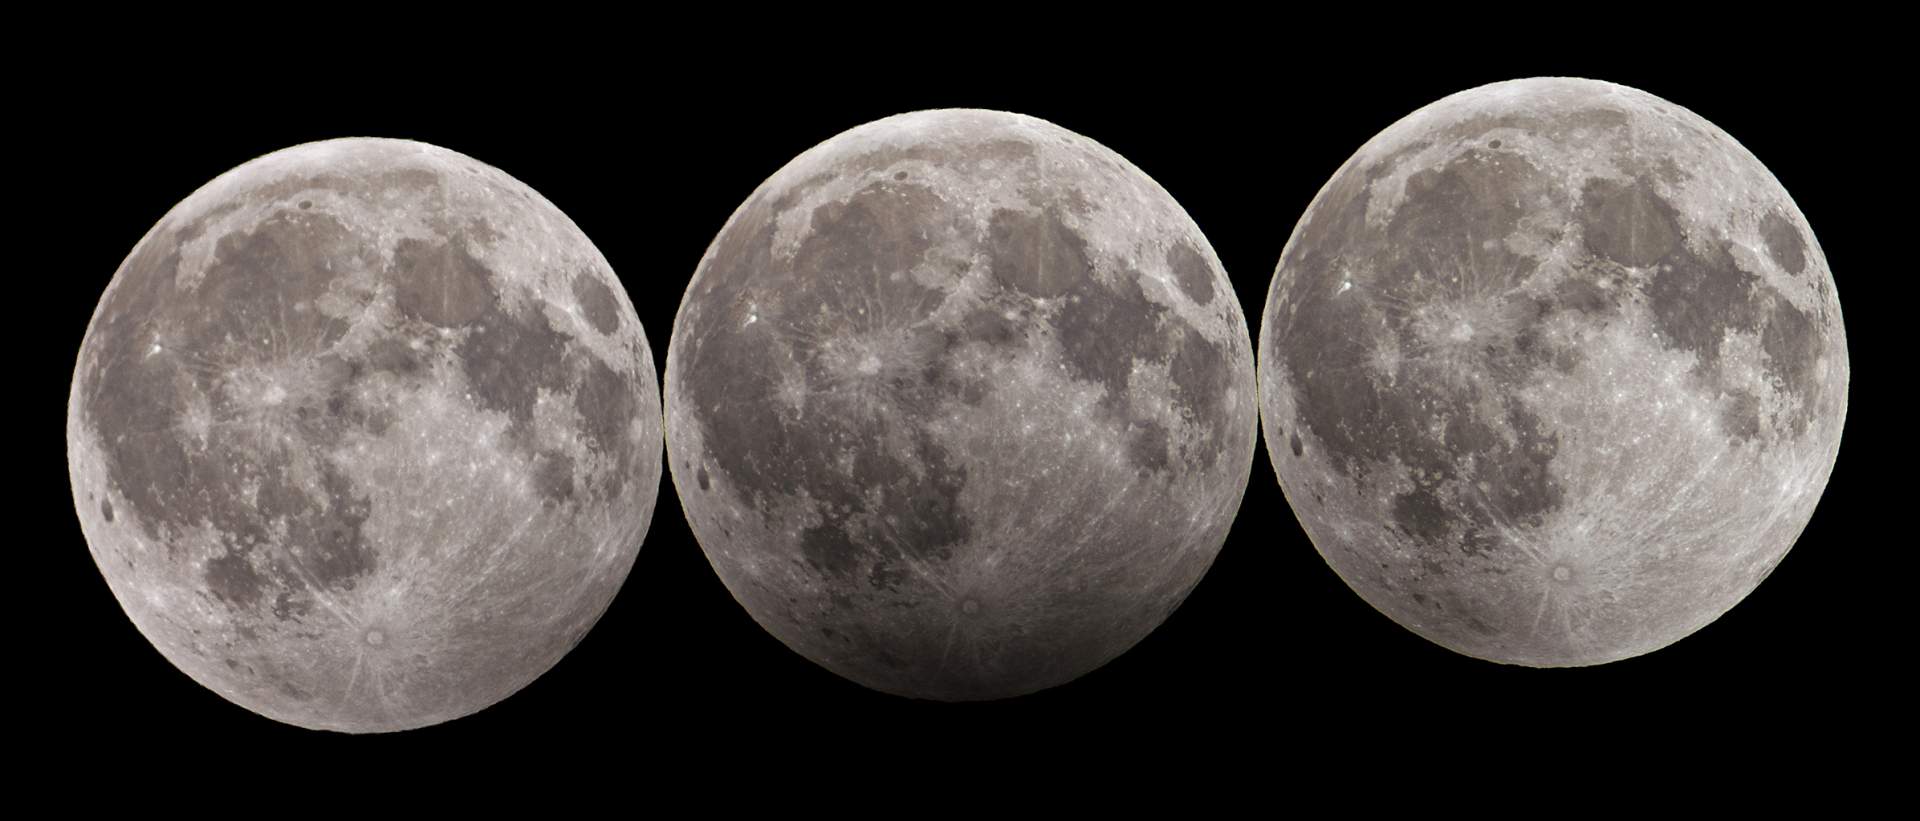 Fig. 2: Partial penumbral eclipse on January 10, 2020; Source: Wikipedia